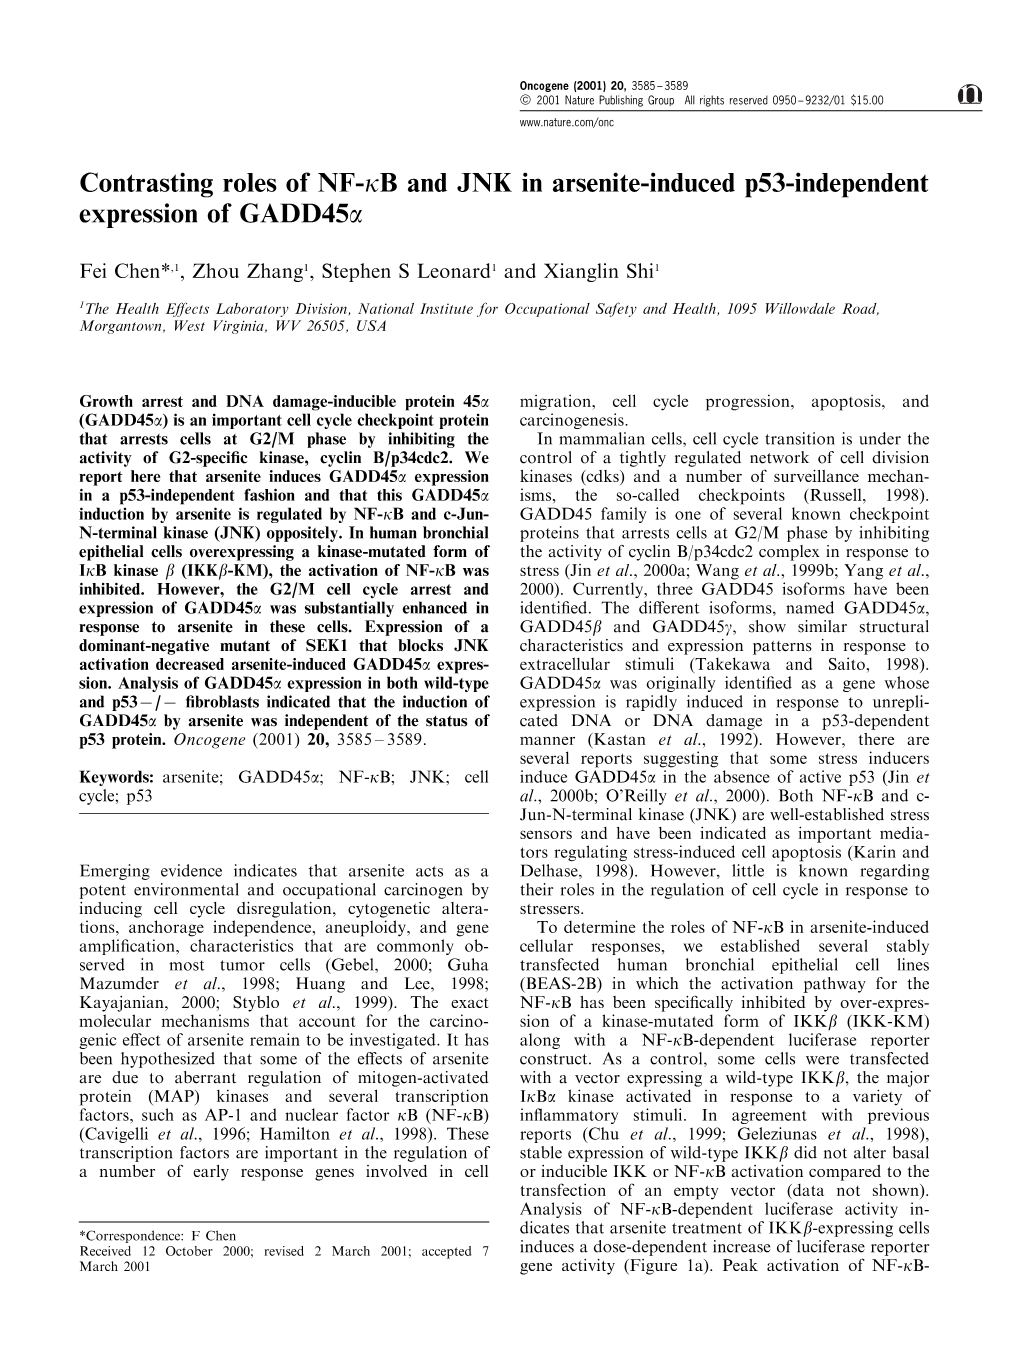 Contrasting Roles of NF-Kb and JNK in Arsenite-Induced P53-Independent Expression of Gadd45a